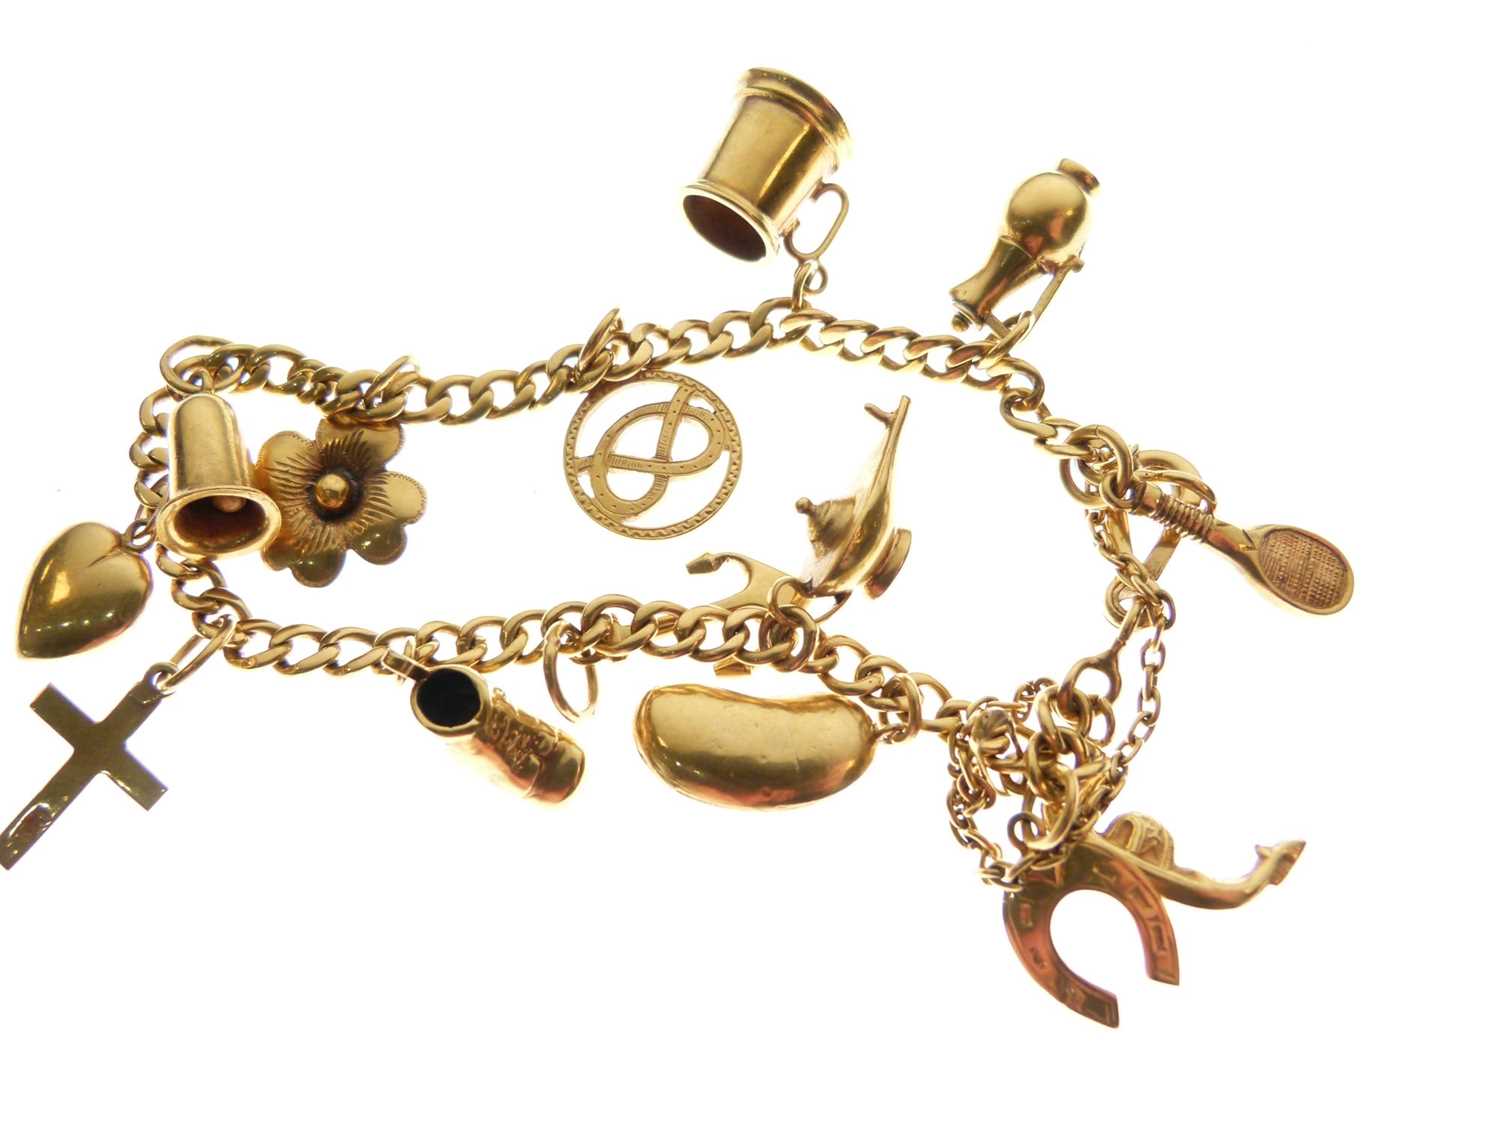 Yellow metal bracelet with various charms attached - Image 5 of 7